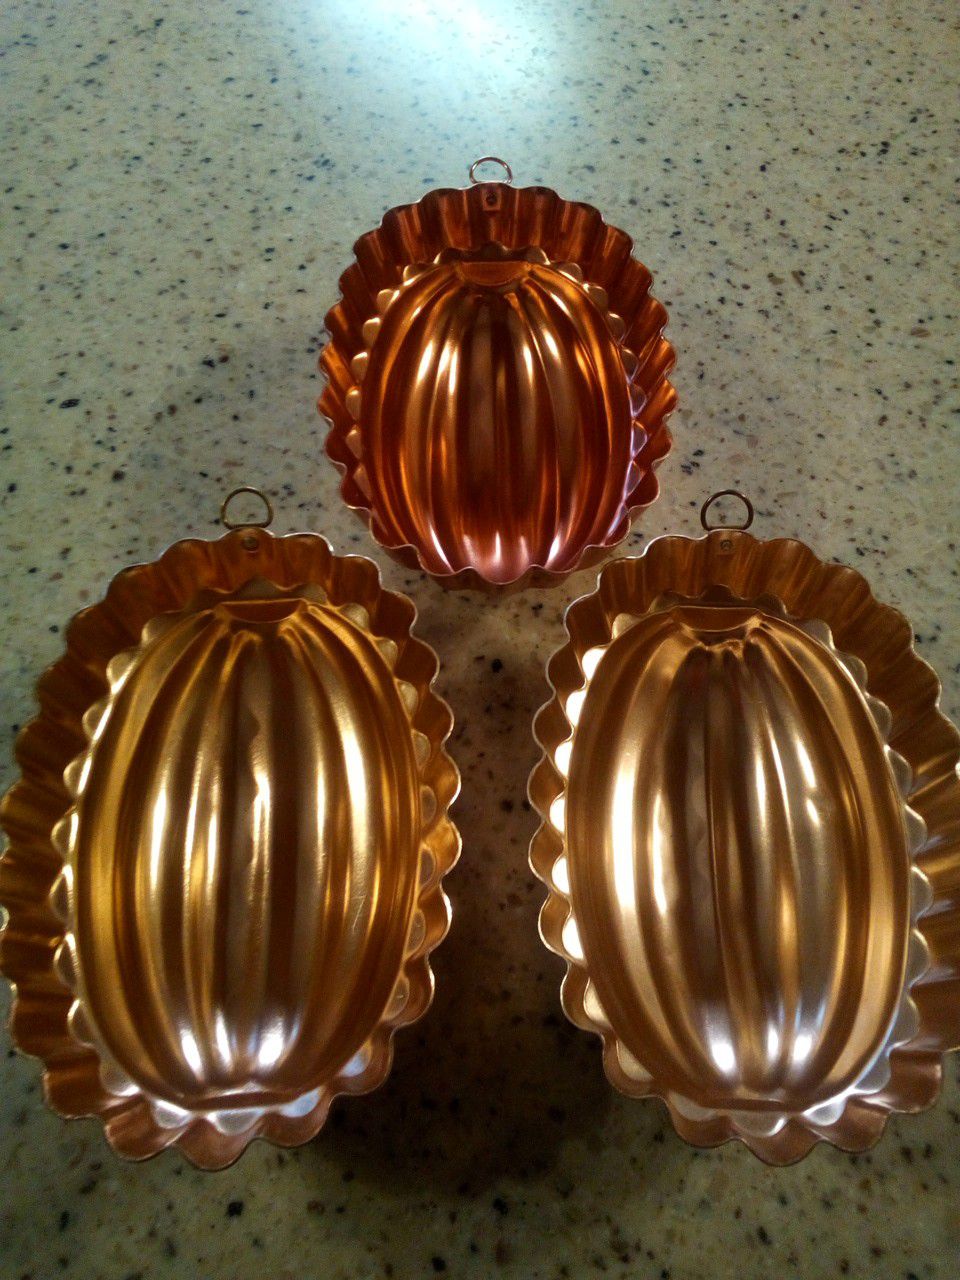 Vintage copper jello molds/2.5 cup capacity each/ hanging wall decoration or use for jello/5x7x3 inch